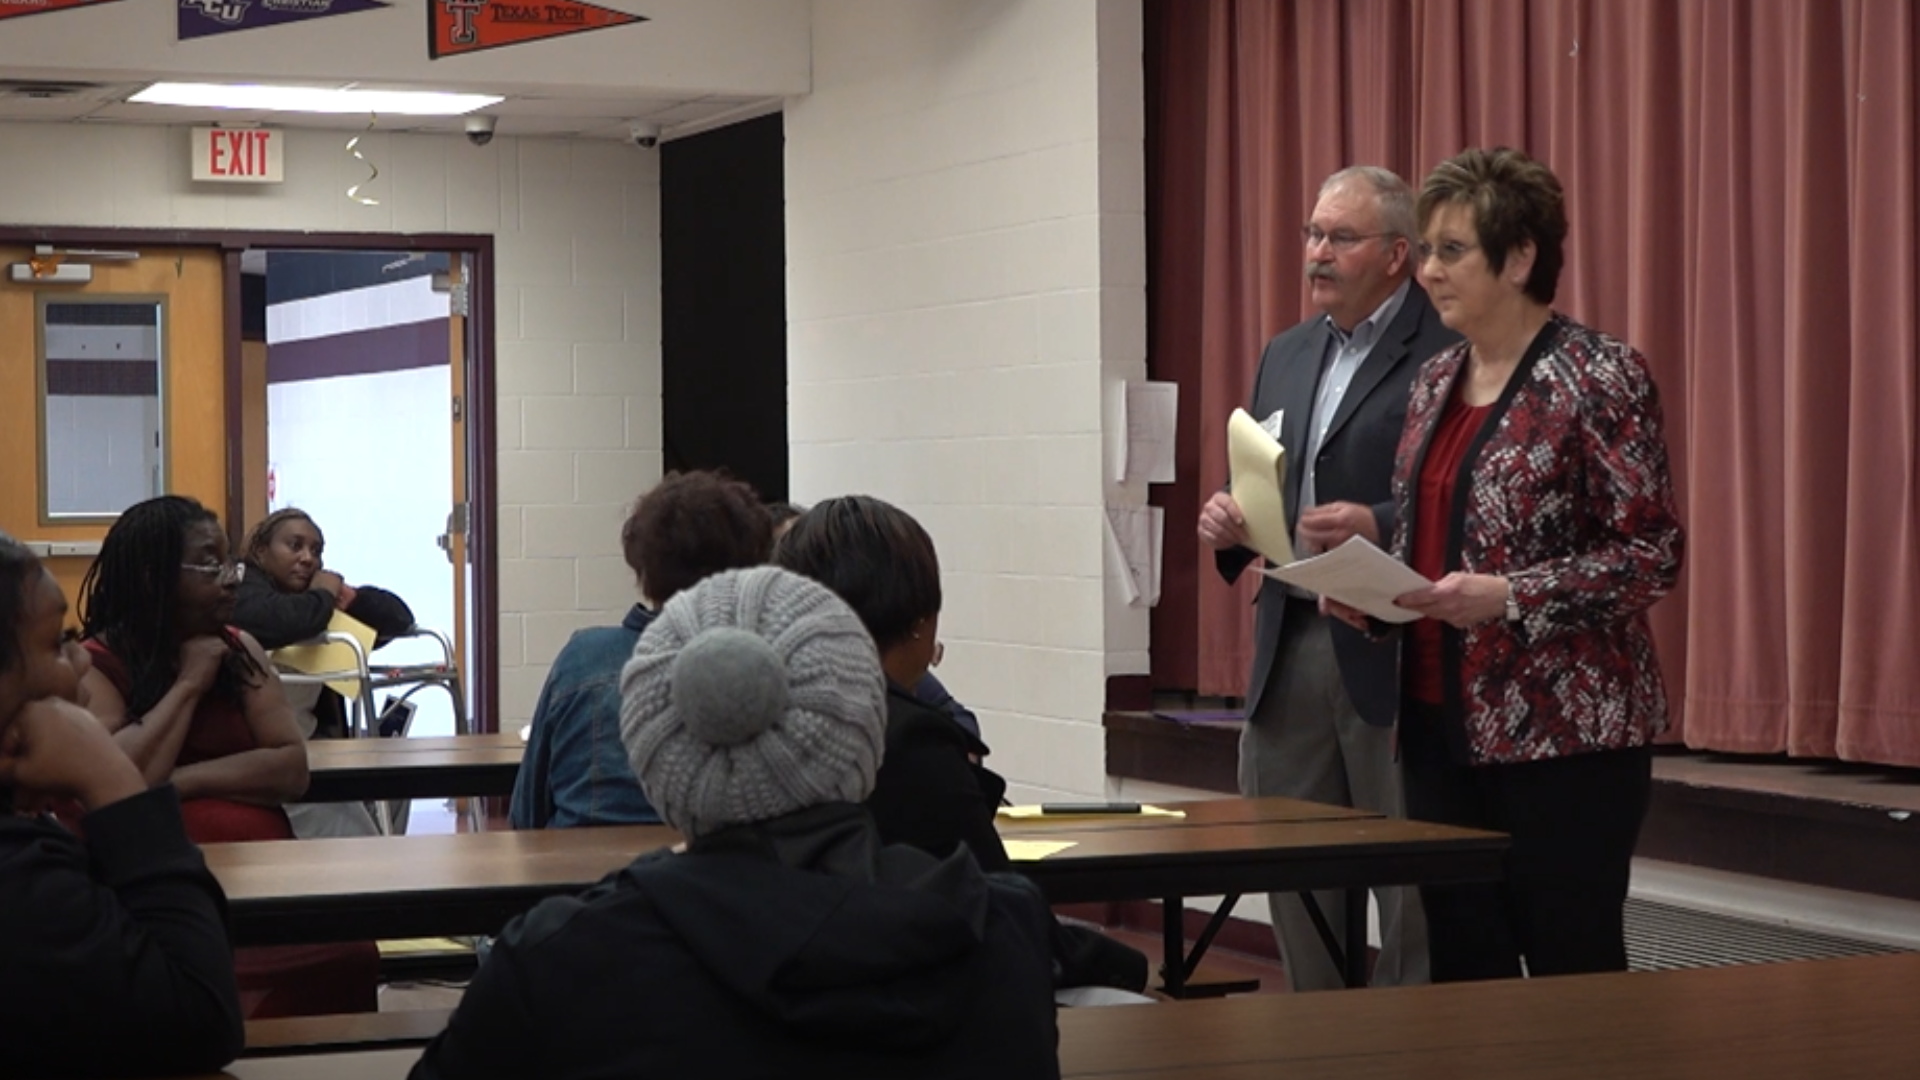 Parents got the chance to ask the interim superintendent questions on Thursday about how to make the district better for their students.